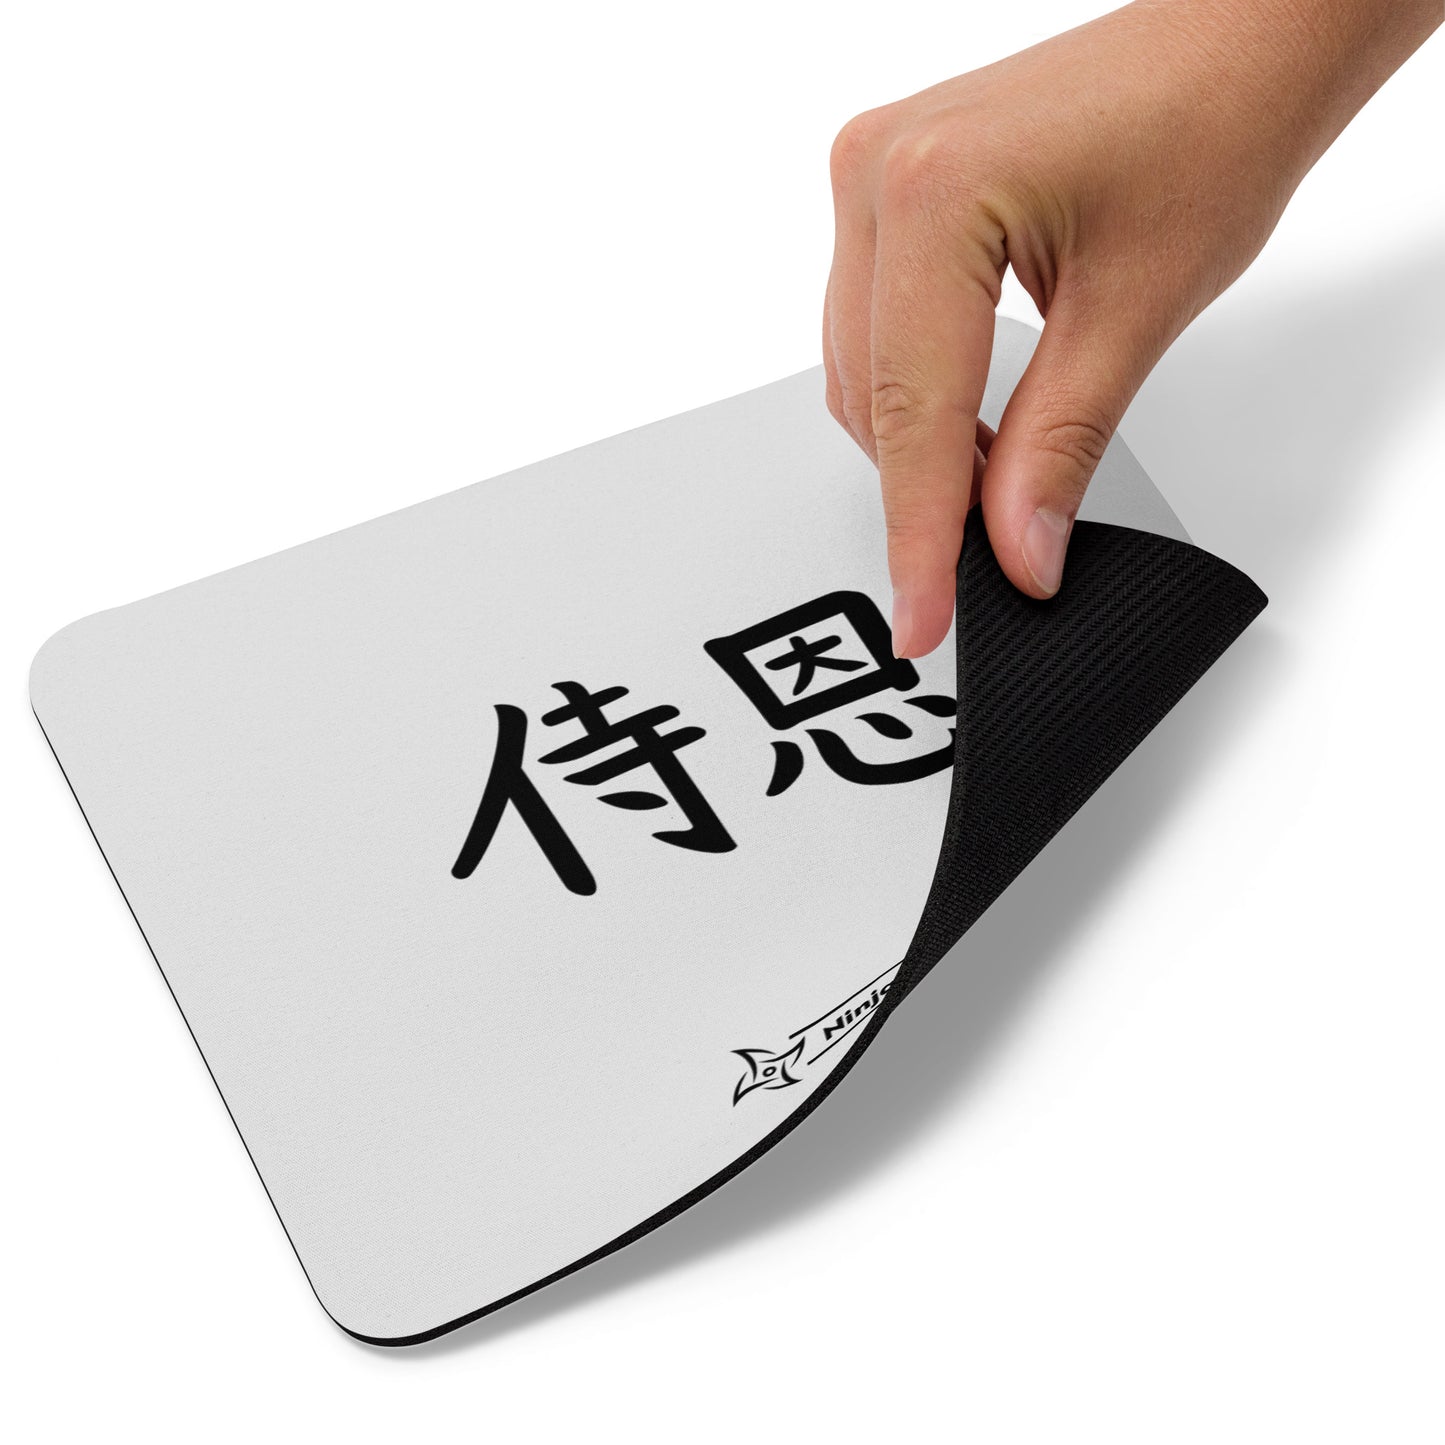 "John" in Japanese Kanji, Mouse pad (Light color, Left to right writing)